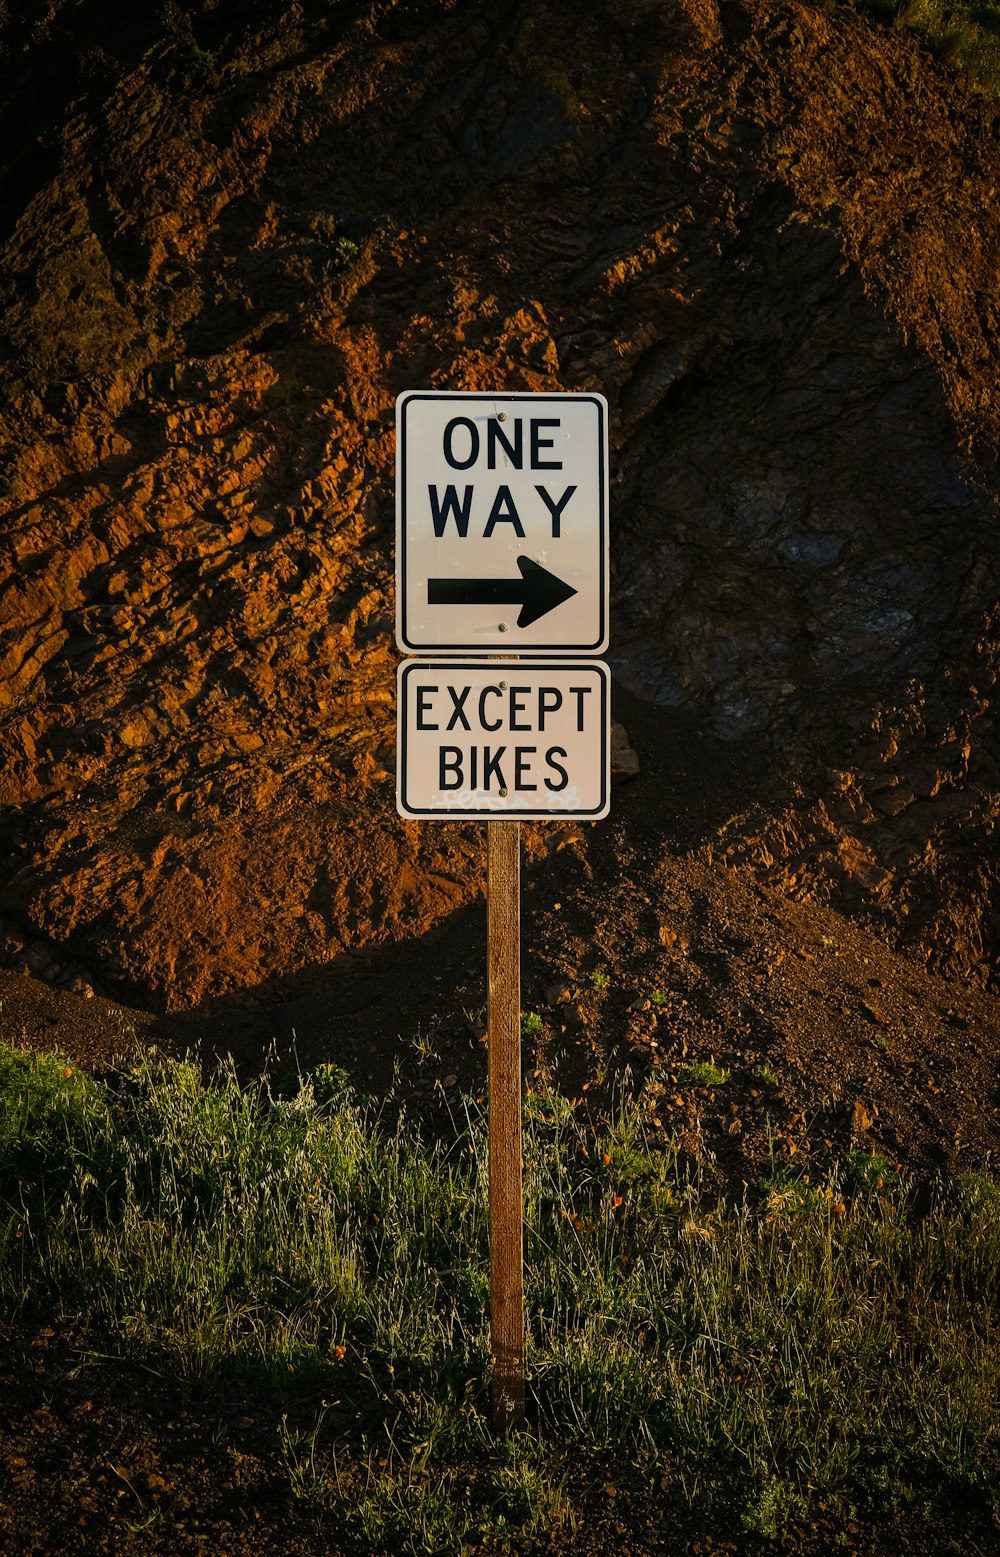 a one way sign with an arrow pointing to the right